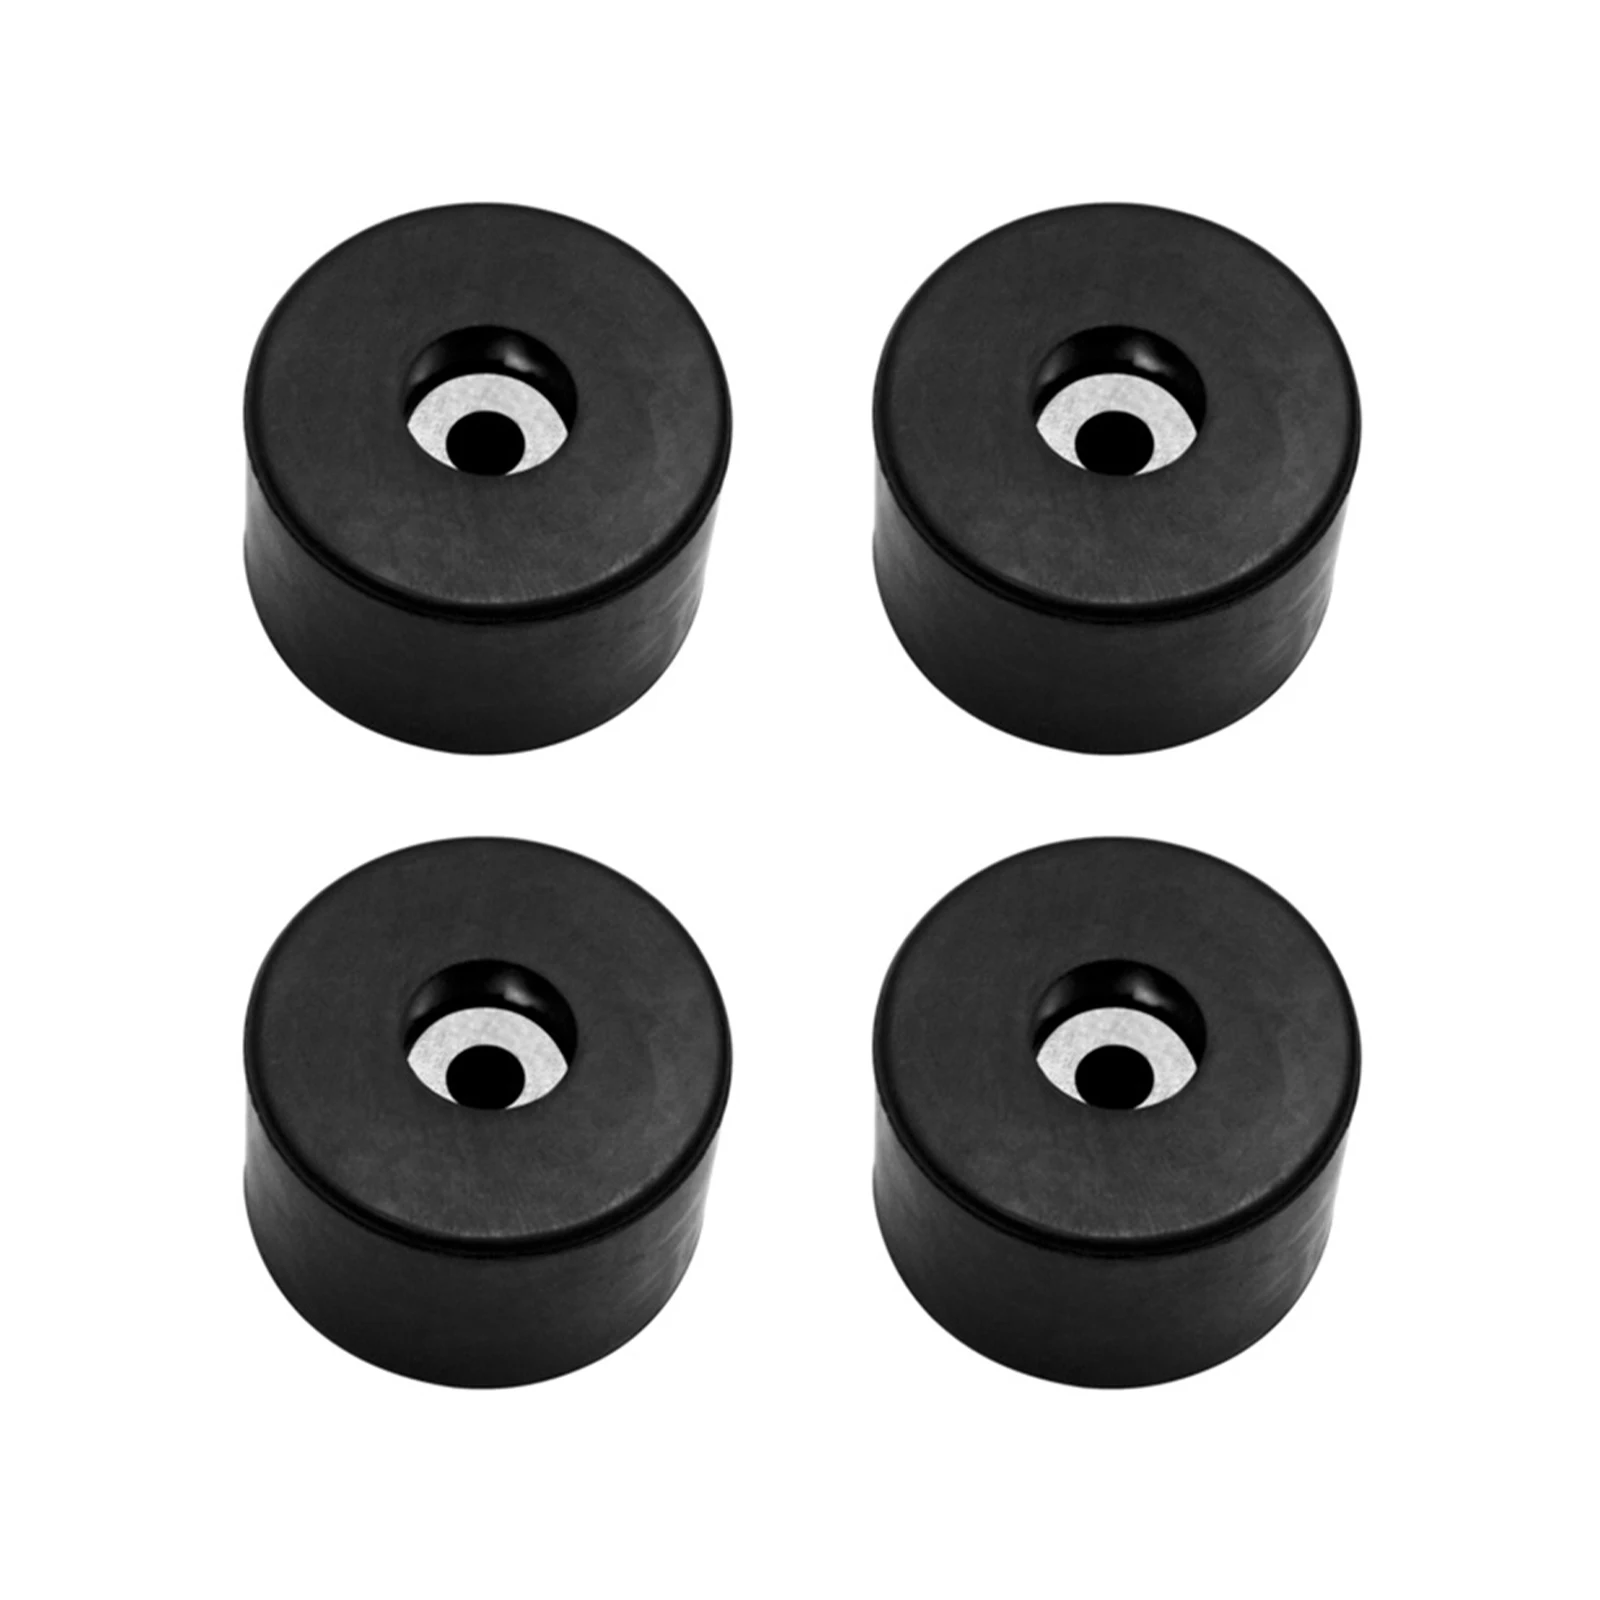 

4pcs Easy Install Durable Rubber Pad Shock Absorber Speaker Generator Air Compressor Feet Professional Practical Anti-vibration